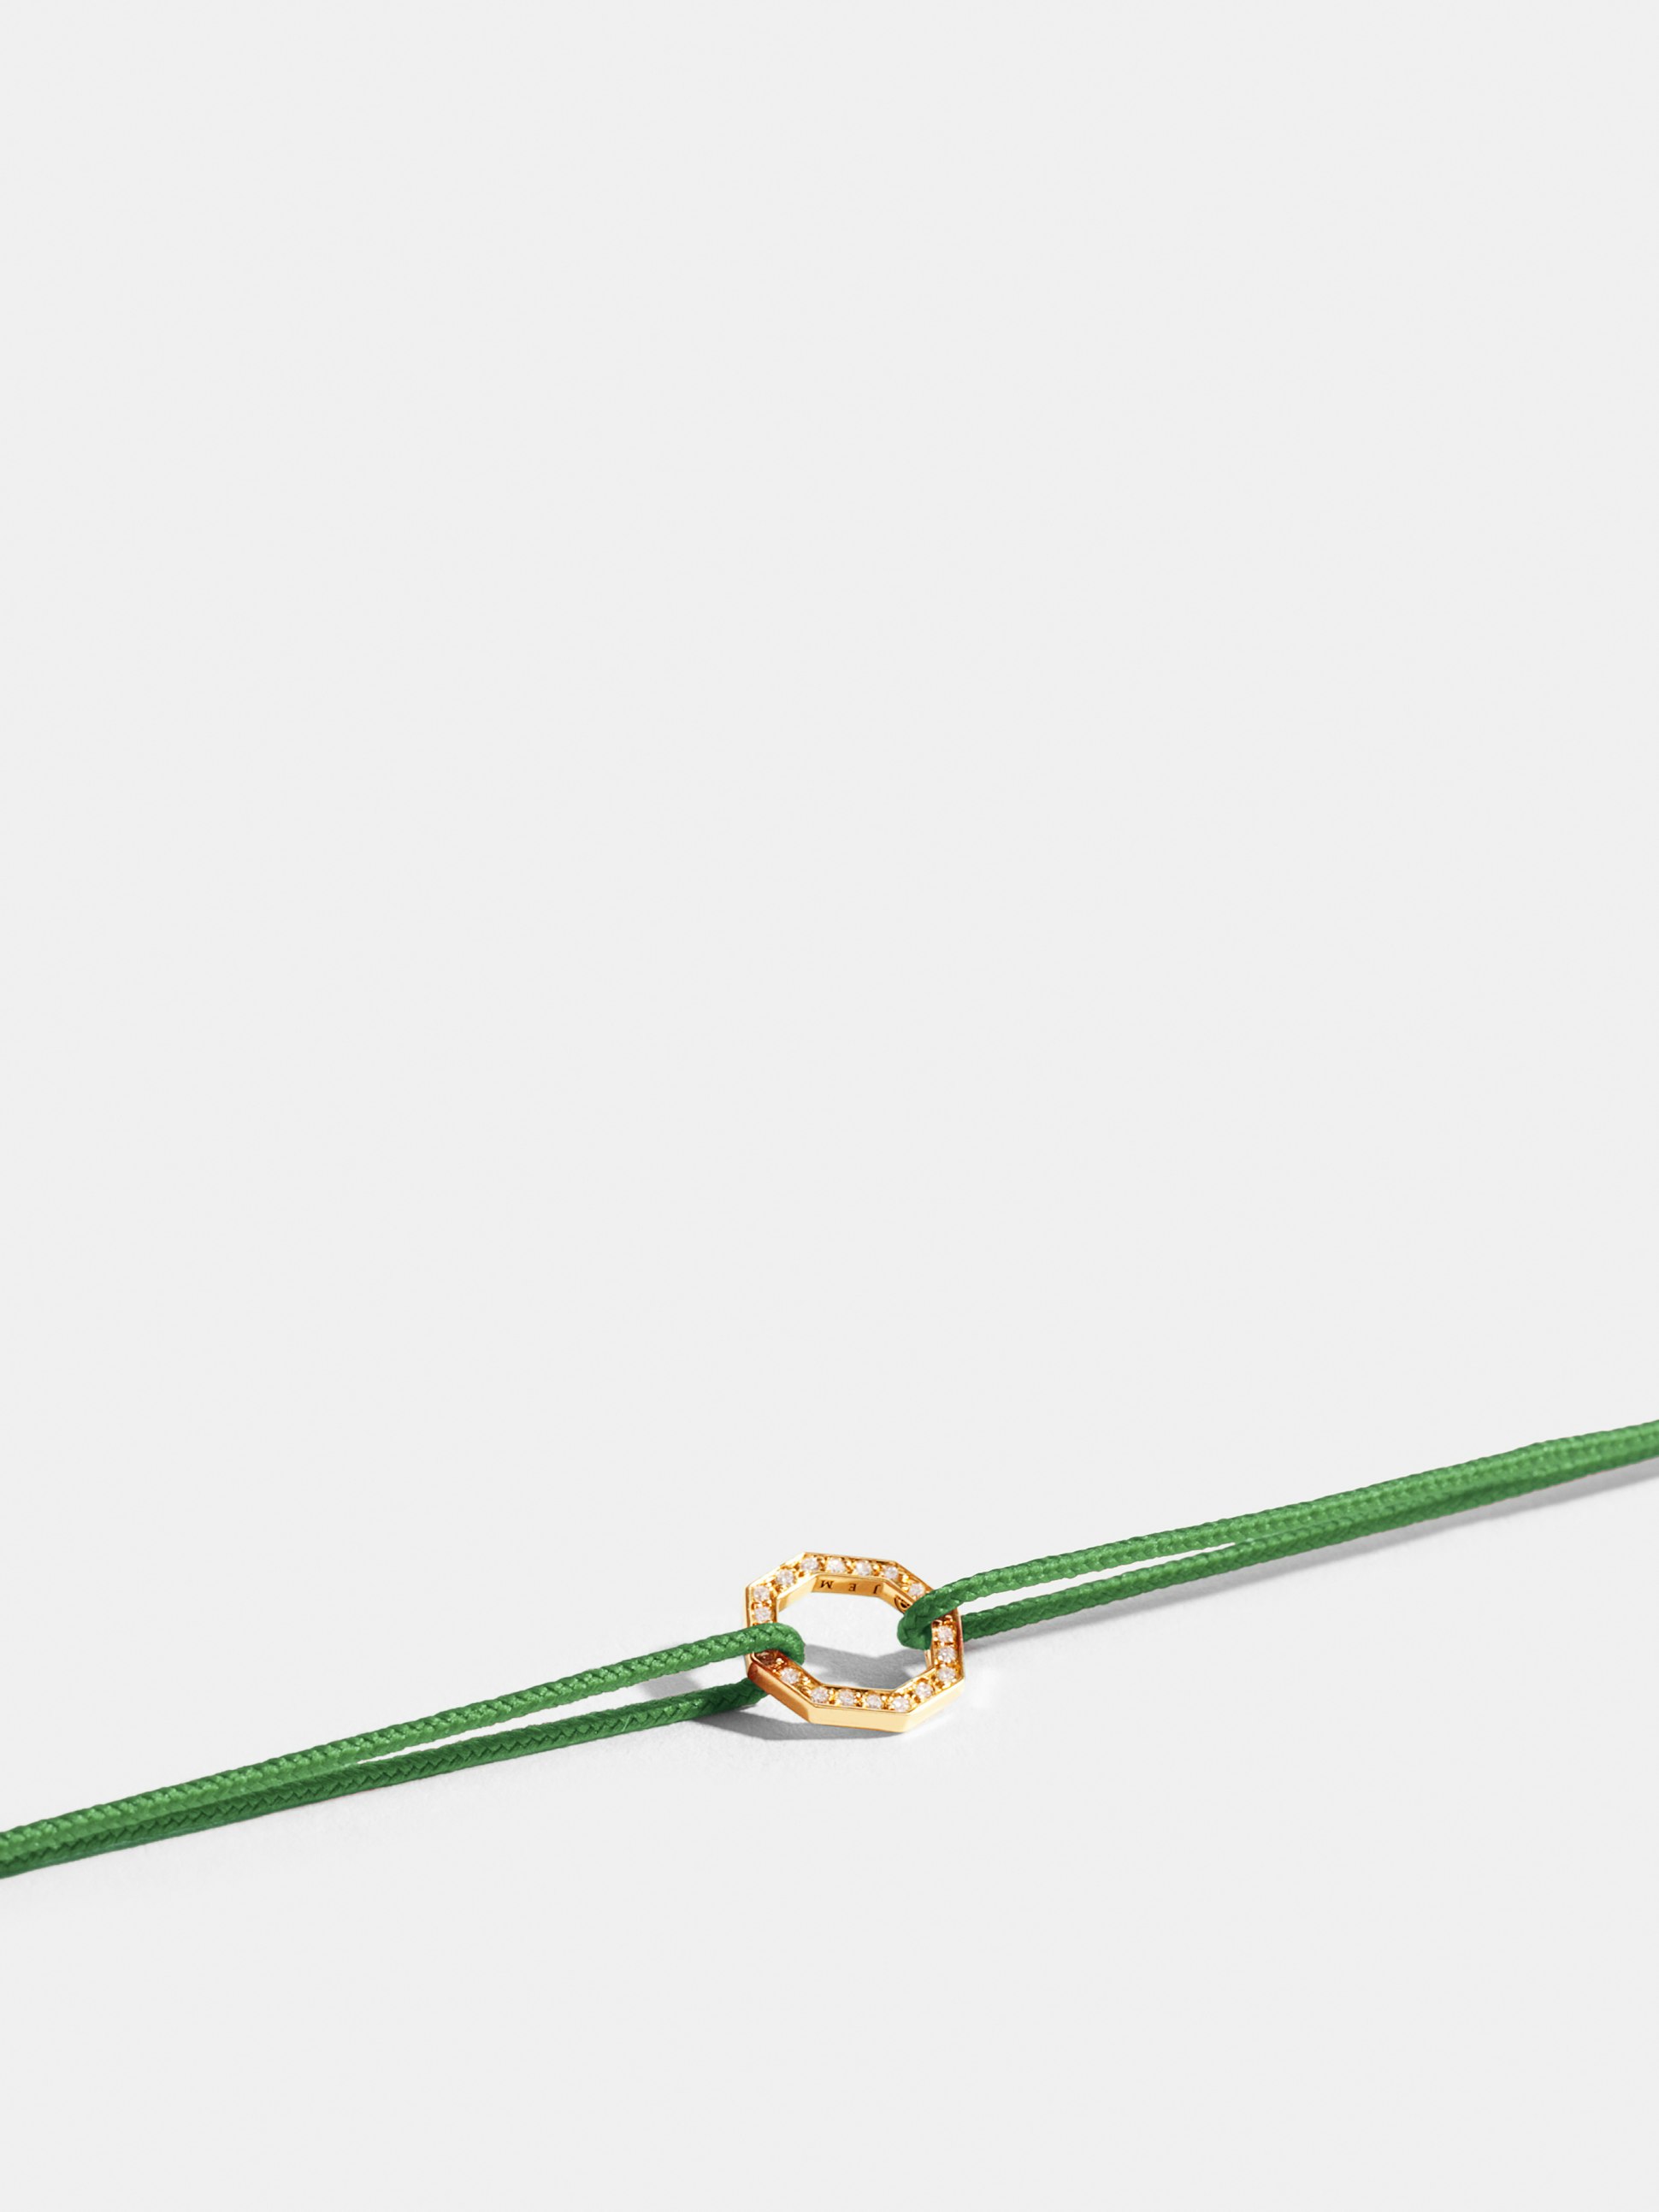 Octogone motif in 18k Fairmined ethical yellow gold, paved with lab-grown diamonds, on an apple green cord.